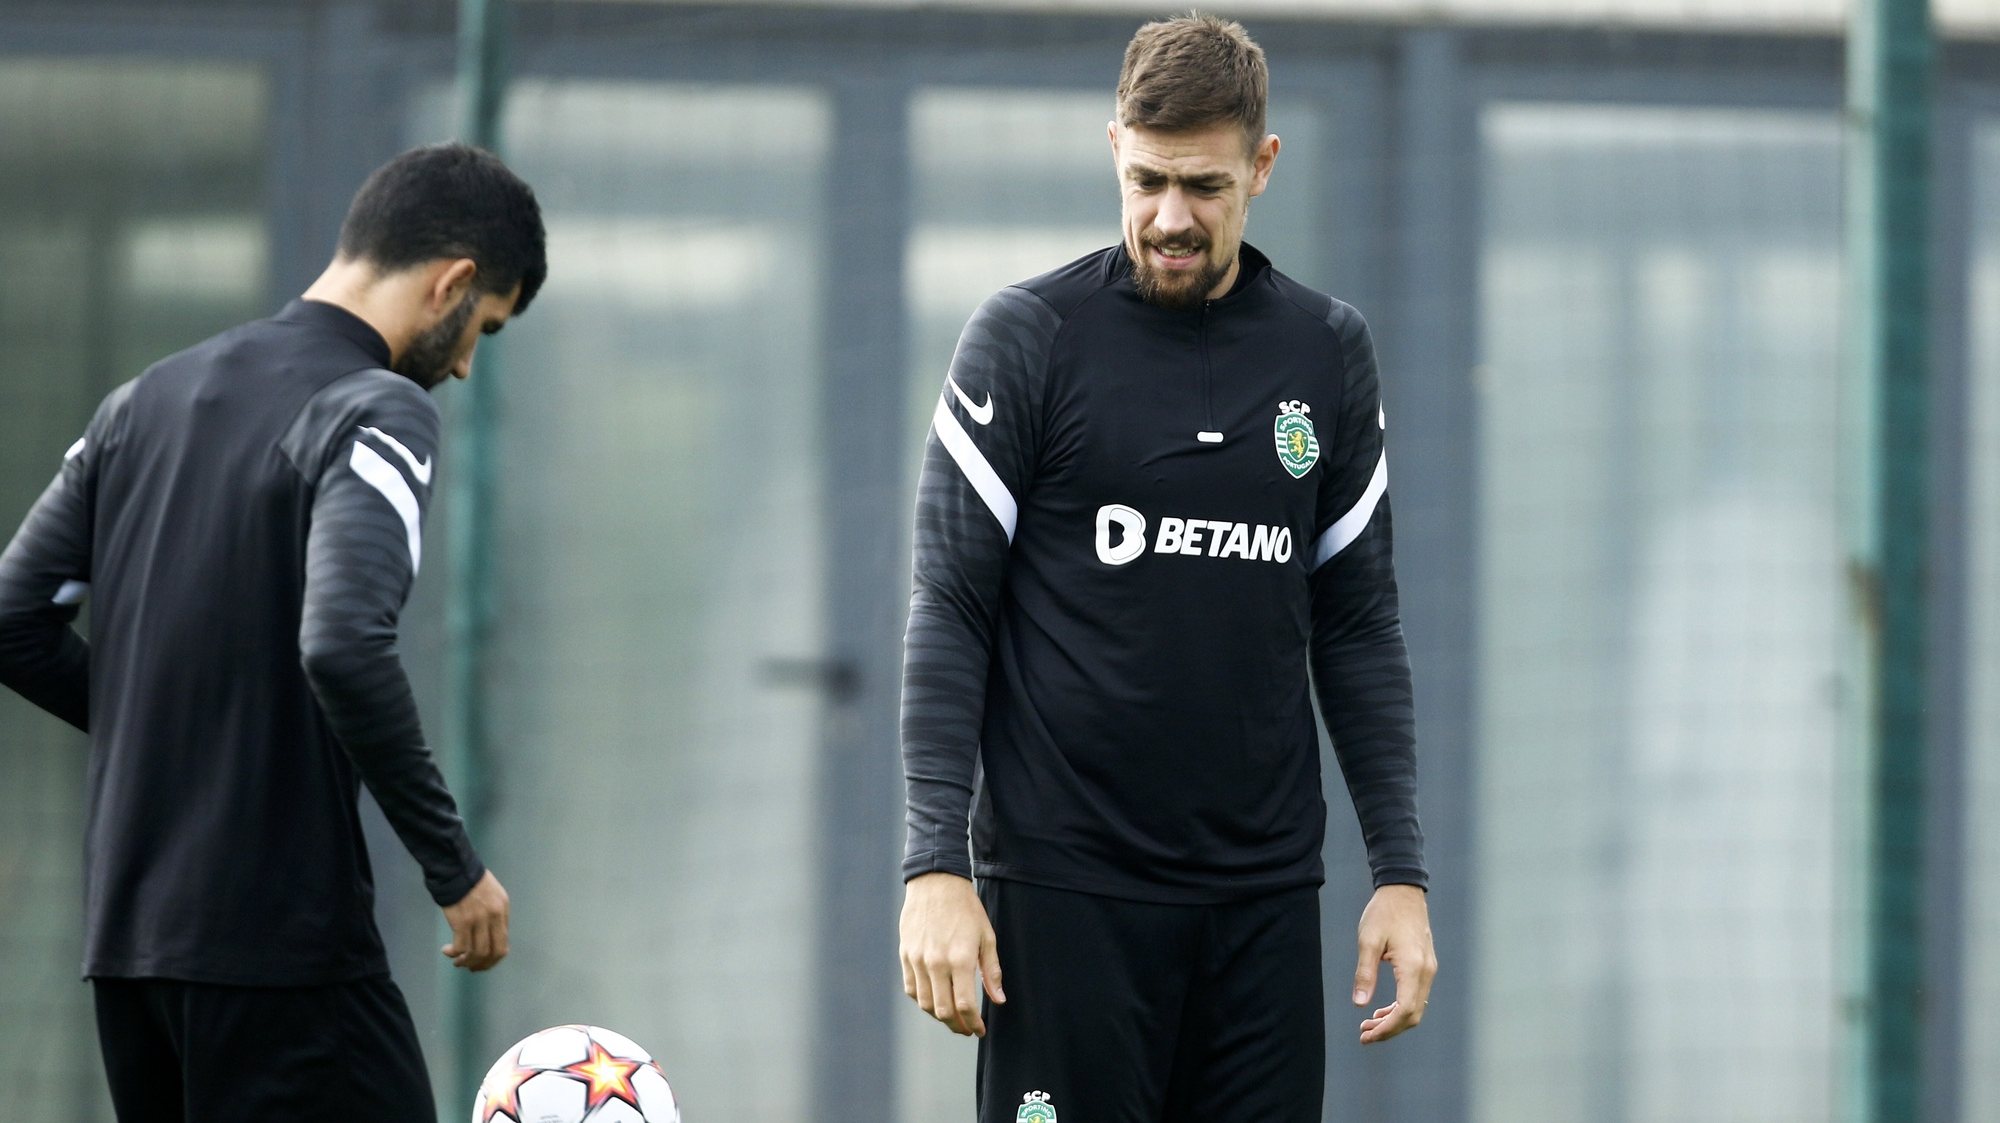 epa09559030 Sporting players Luis Neto (L) and Sebastian Coates (R) perform during their team&#039;s training session at Alcochete Academy in Alcochete, Portugal, 02 November 2021. Sporting Lisbon will face Besiktas Istanbul in their UEFA Champions League group C soccer match on 03 November 2021.  EPA/RUI MINDERICO